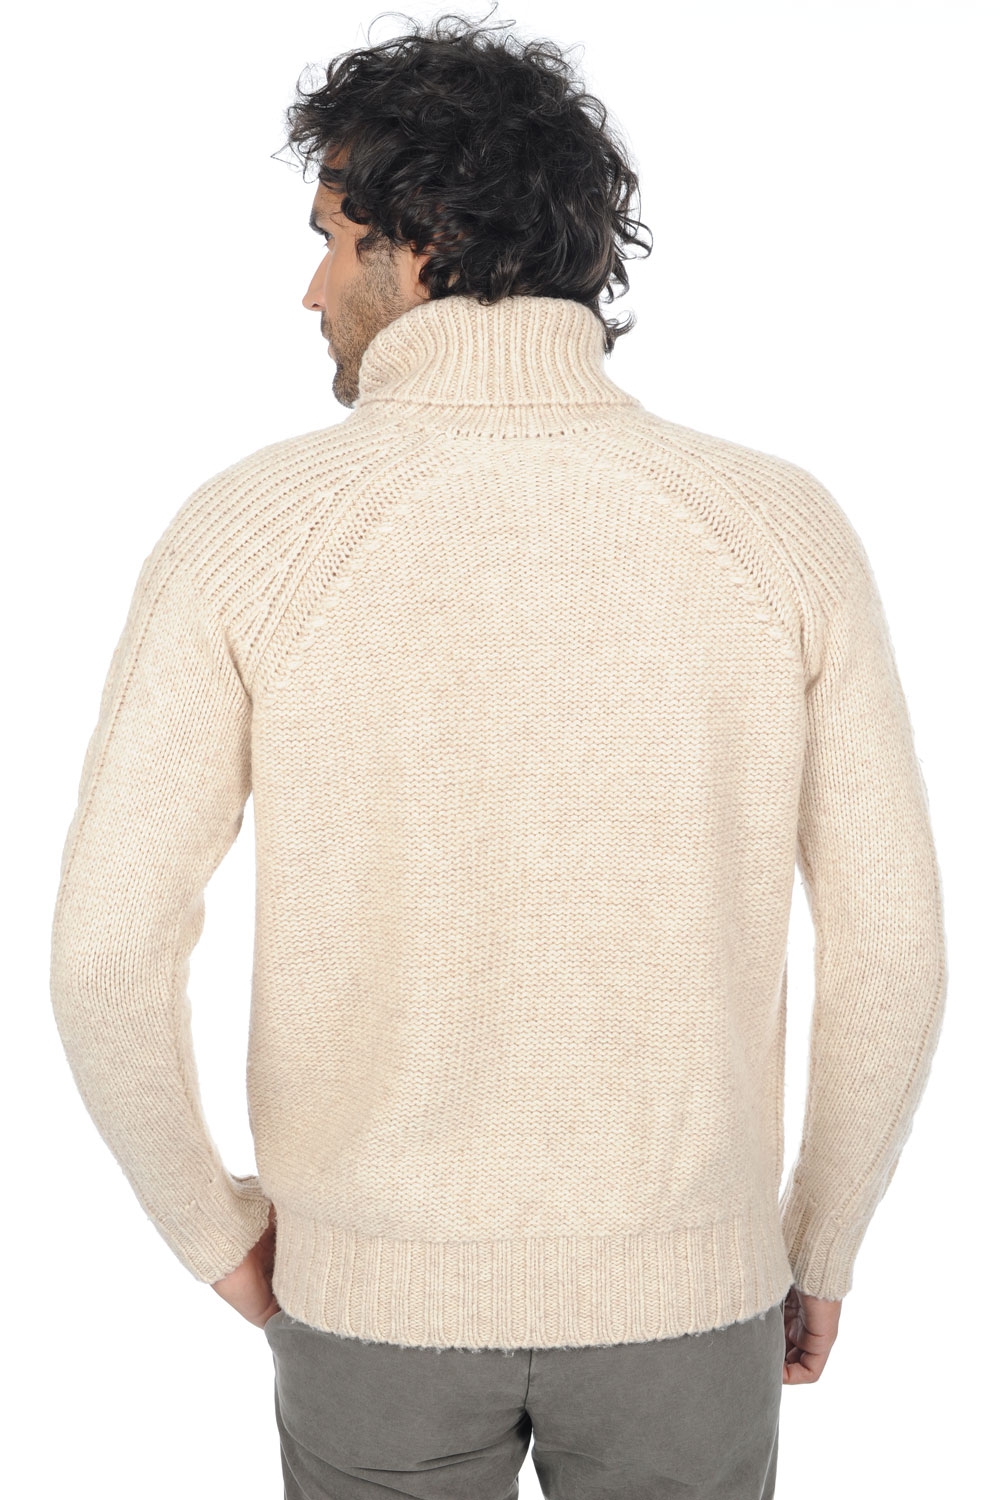 Chameau pull homme col roule idriss nature m